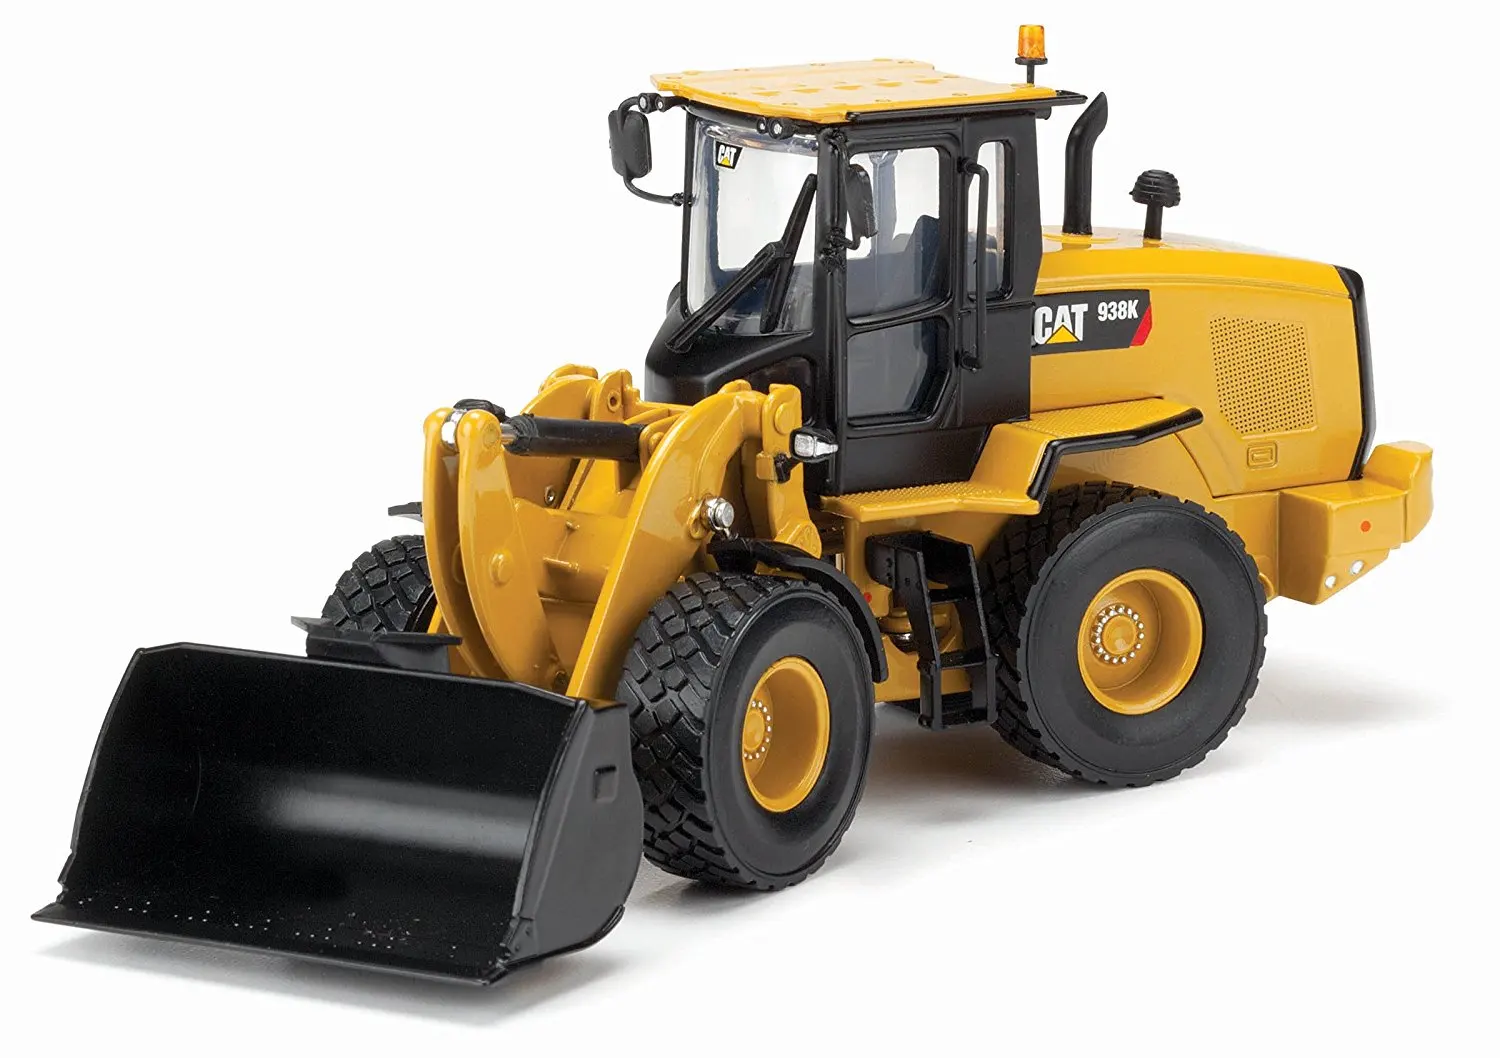 Cheap Used Cat Wheel Loader, find Used Cat Wheel Loader ...